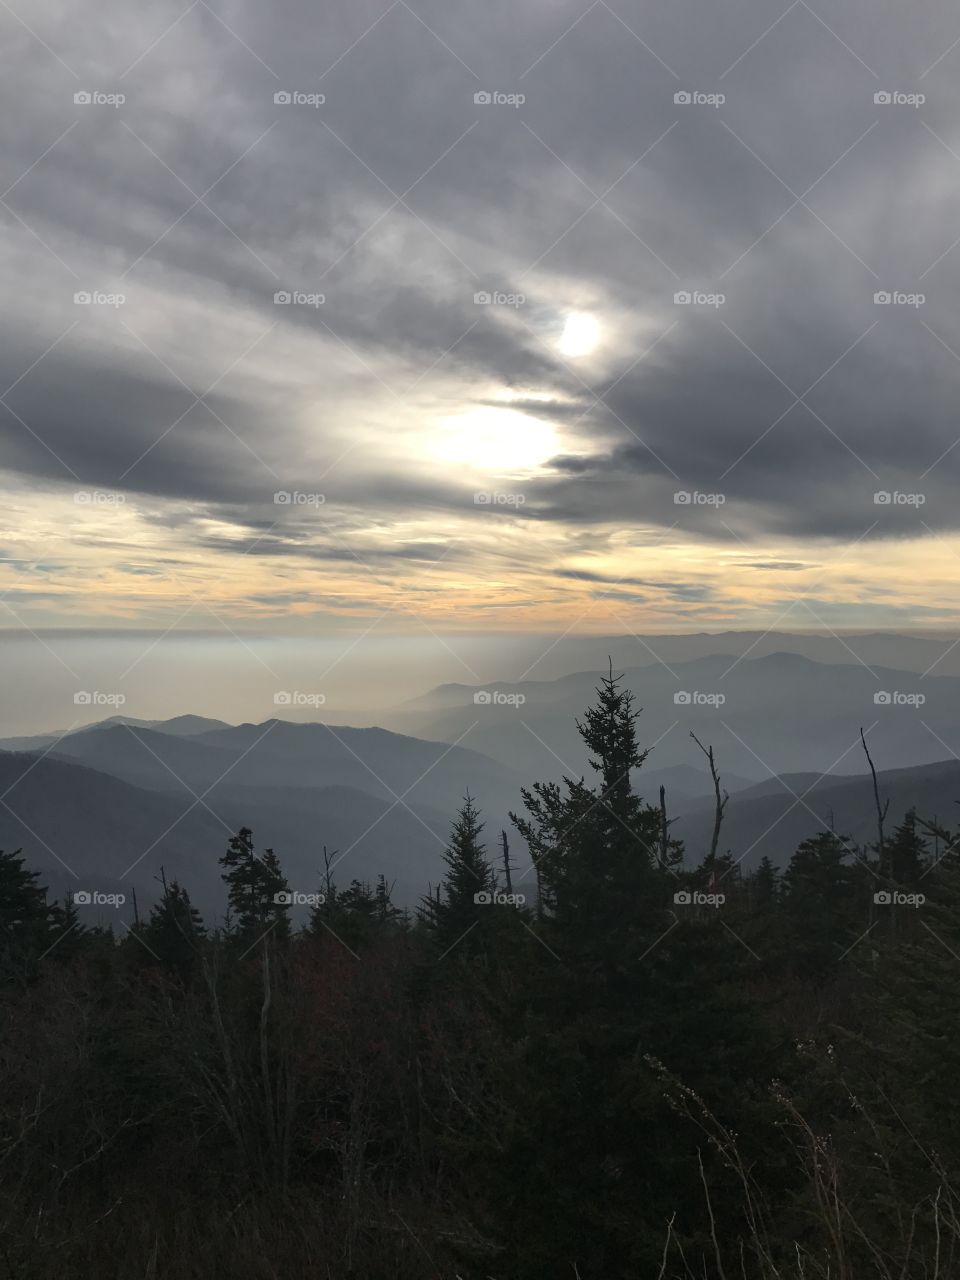 The beautiful Smoky Mountains in November!